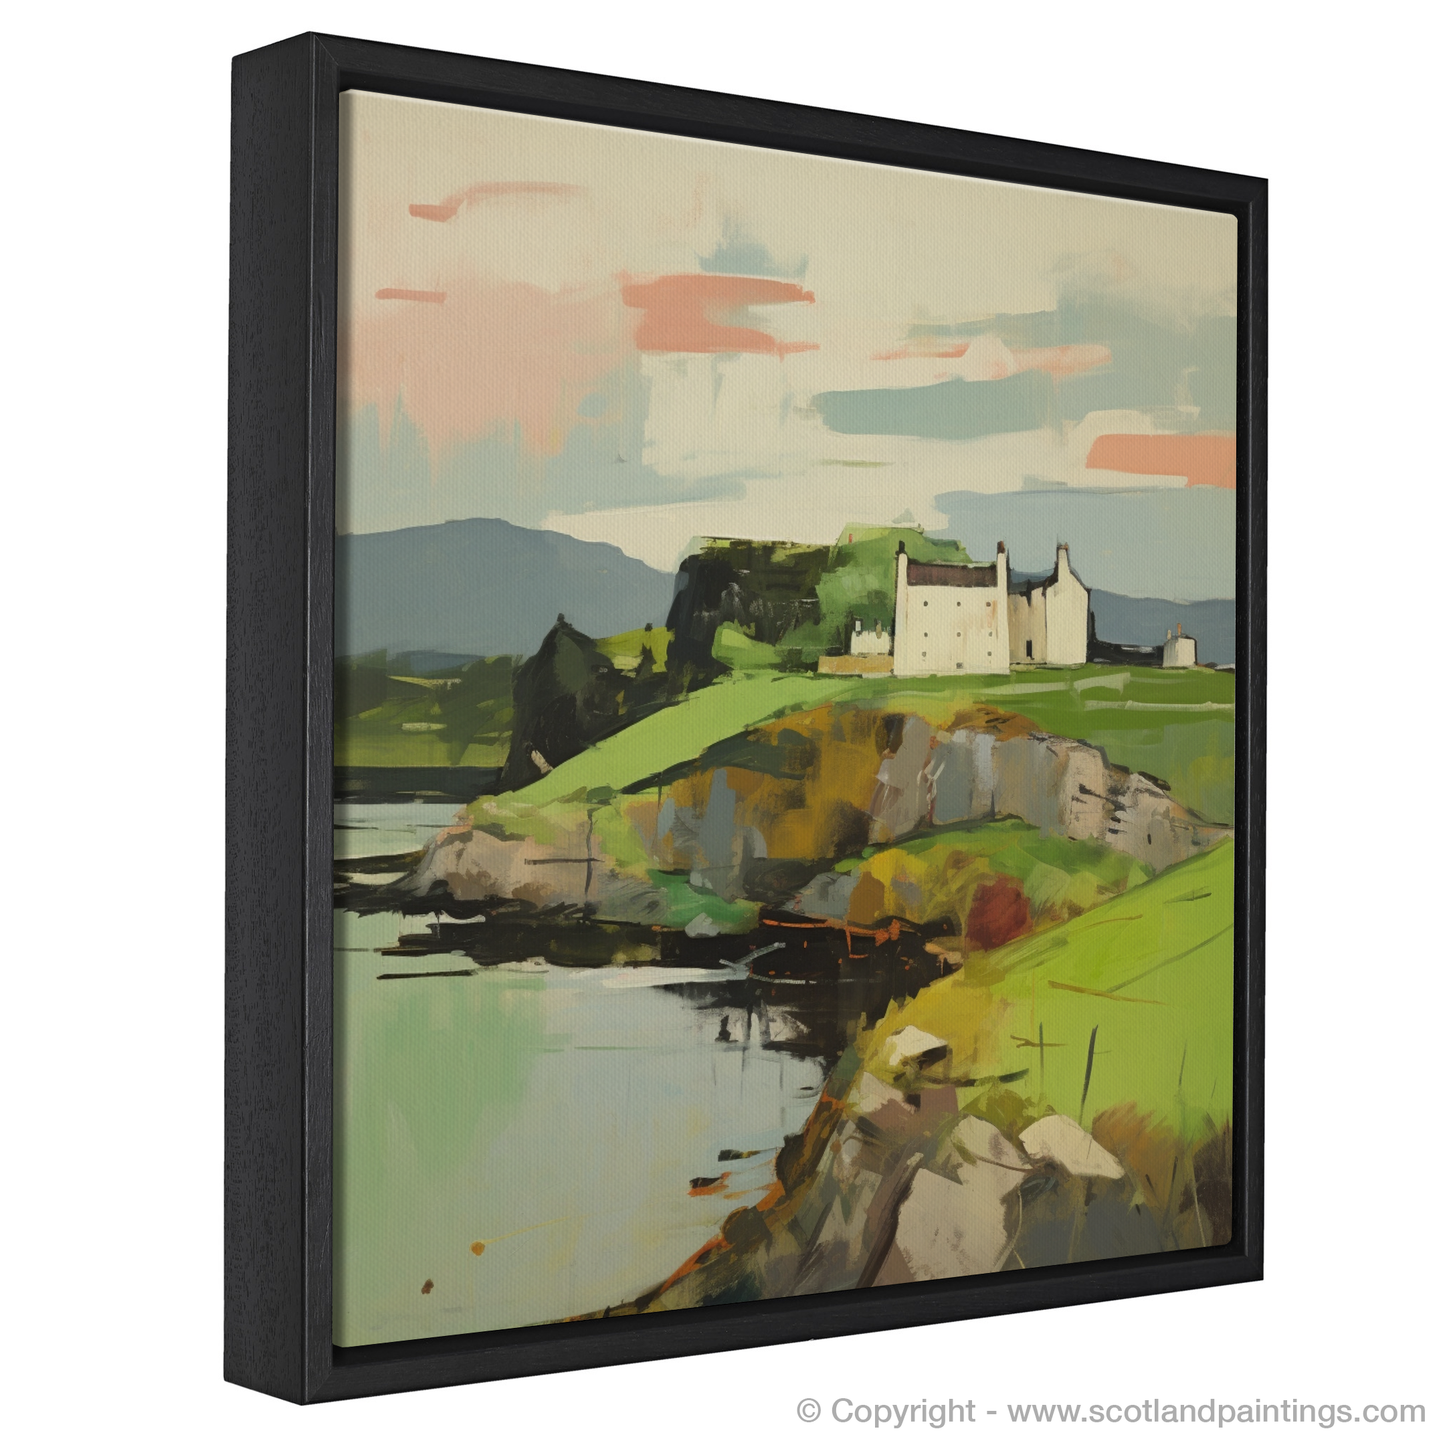 Painting and Art Print of Fort William entitled "Abstract Elegance of Fort William".